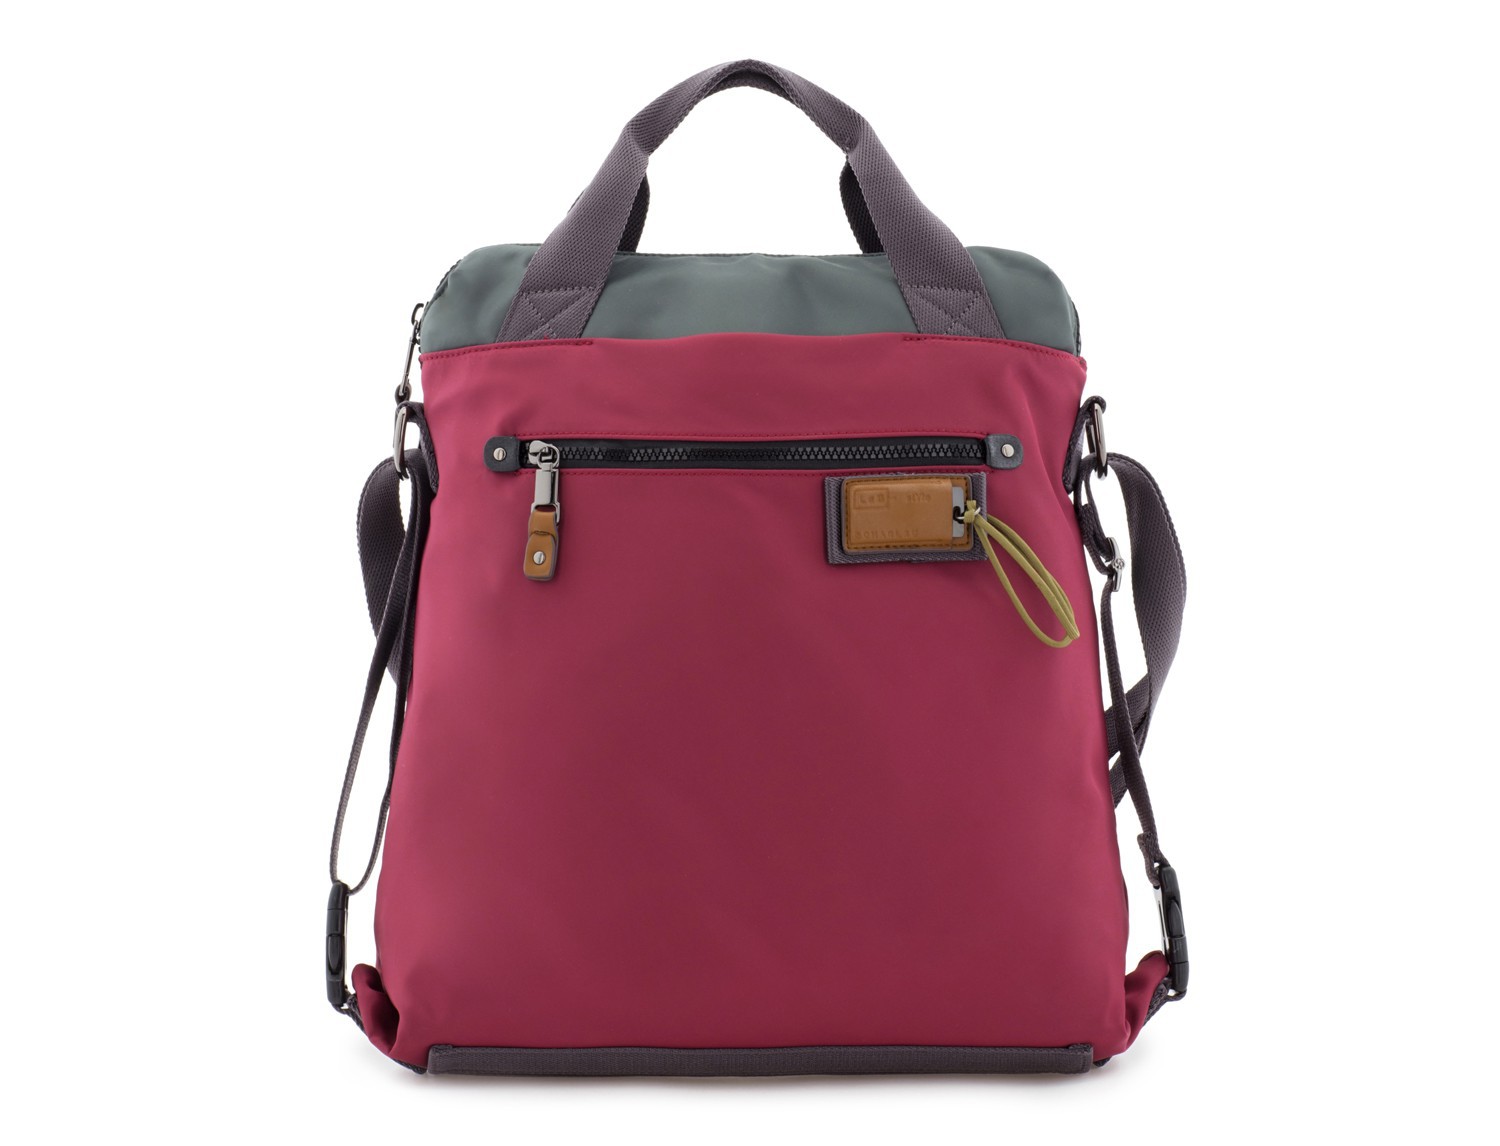 Bag convertible into backpack in red front